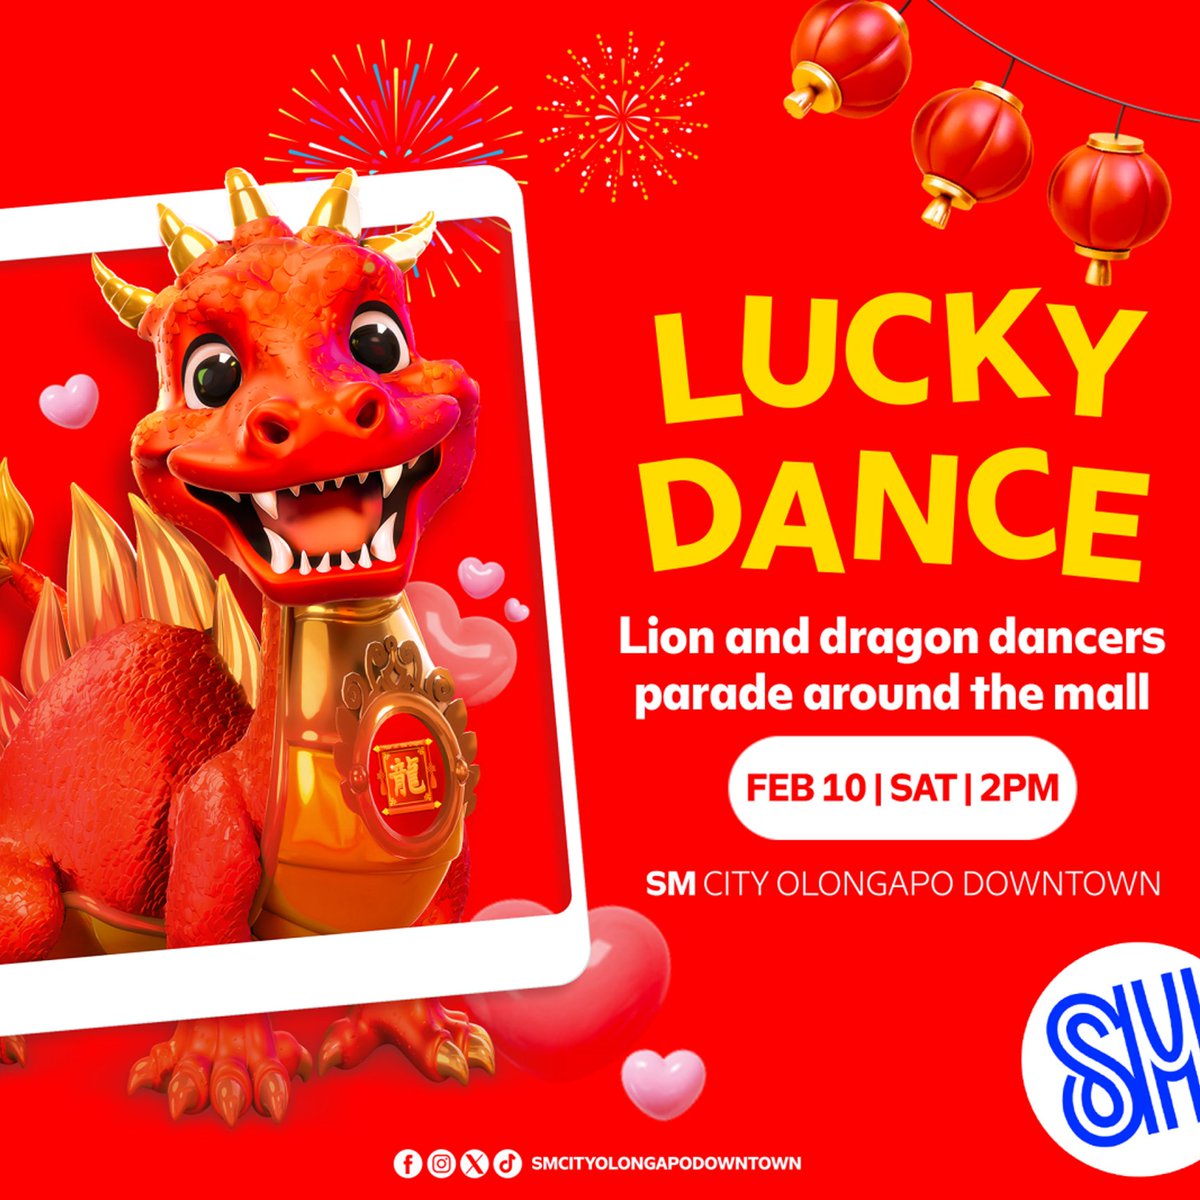 Roar & immerse yourself in the spirit of the dragon this Chinese New Year by watching this year's Dragon Dance at SM City Olongapo Downtown on Feb 10, Sat, 2PM.
Bring the #LuckInLoveAtSM & witness an electrifying performance that will surely bring all the good fortune this 2024.